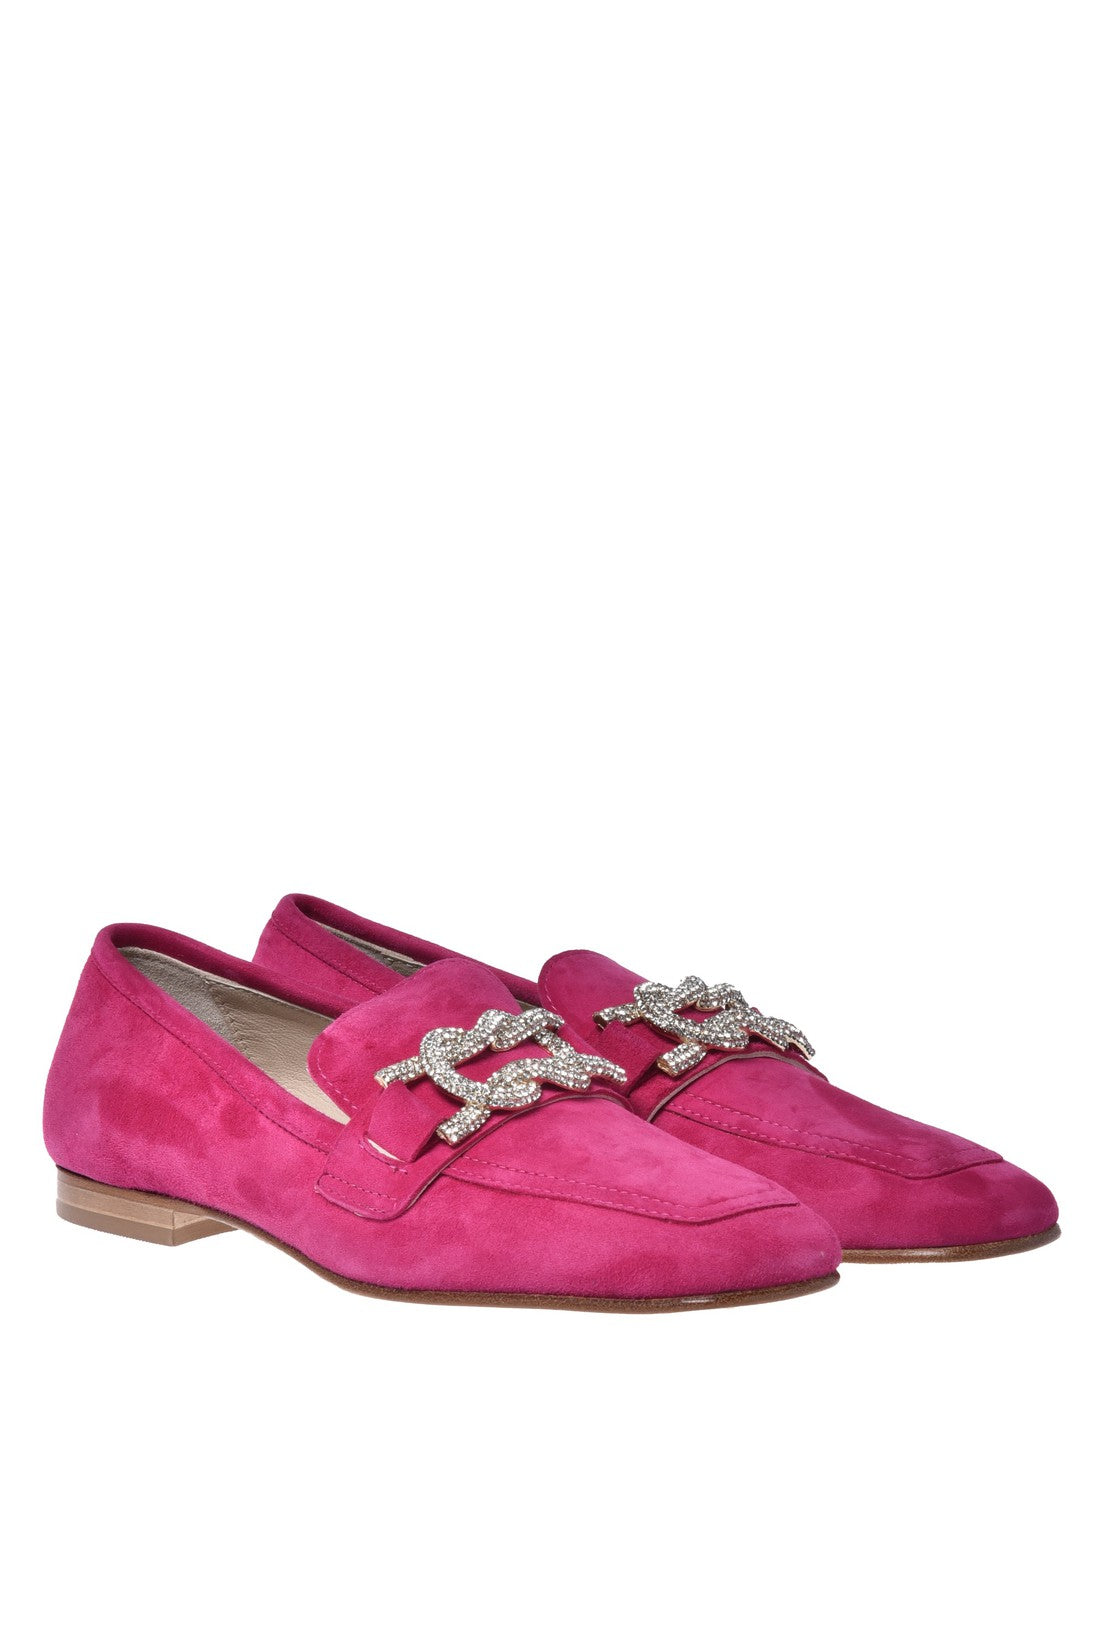 BALDININI-OUTLET-SALE-Loafer-in-fuchsia-suede-Halbschuhe-ARCHIVE-COLLECTION-3.jpg